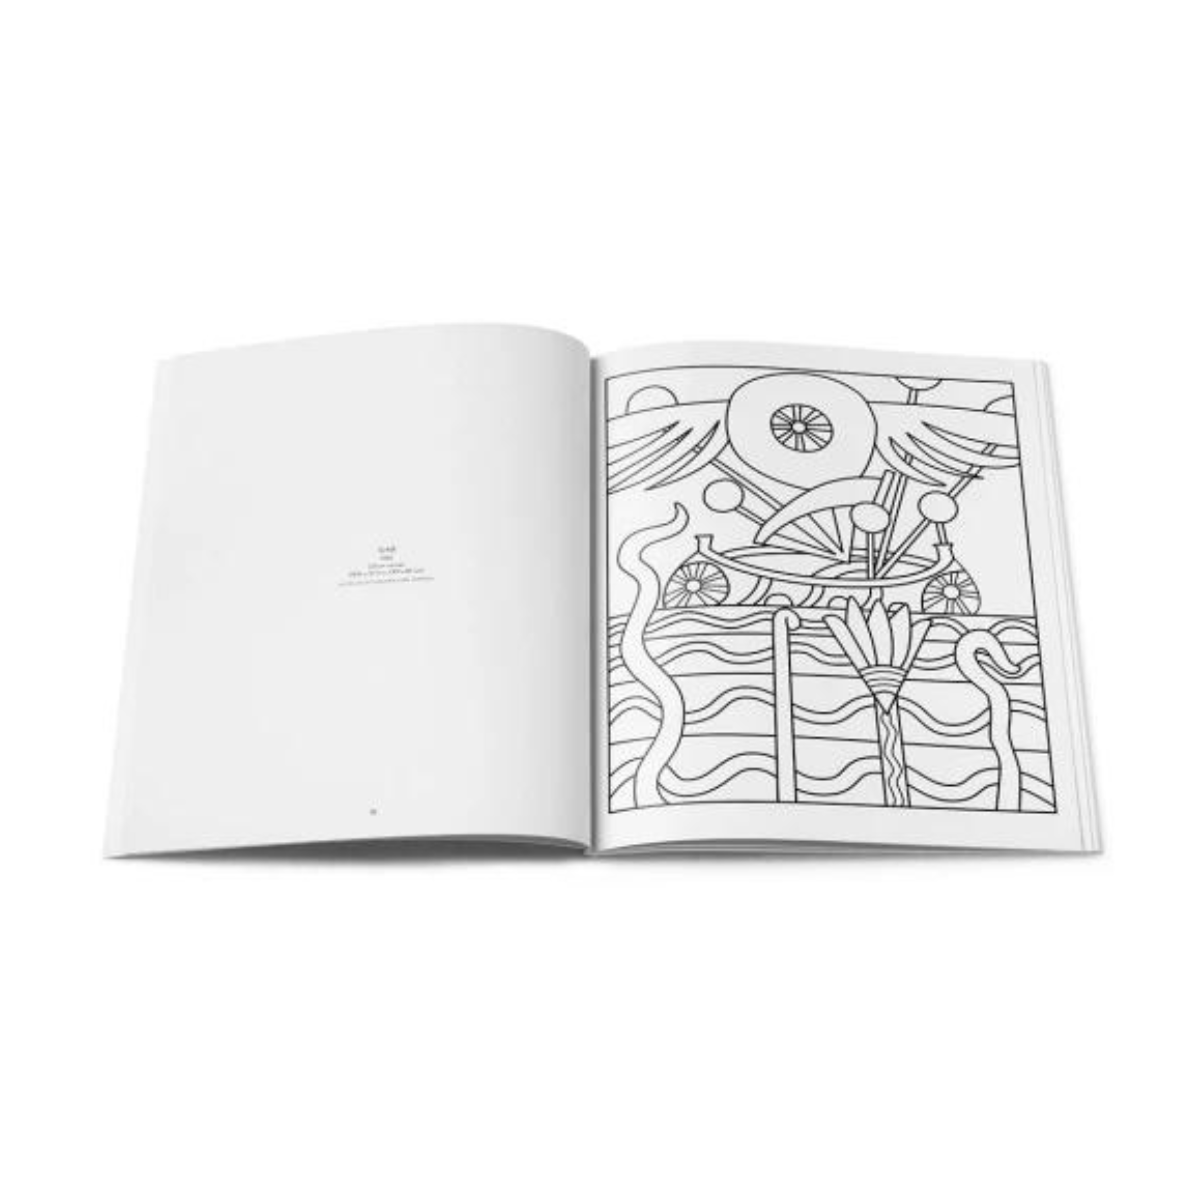 The Coloring Book of the Art of Marsden Hartley